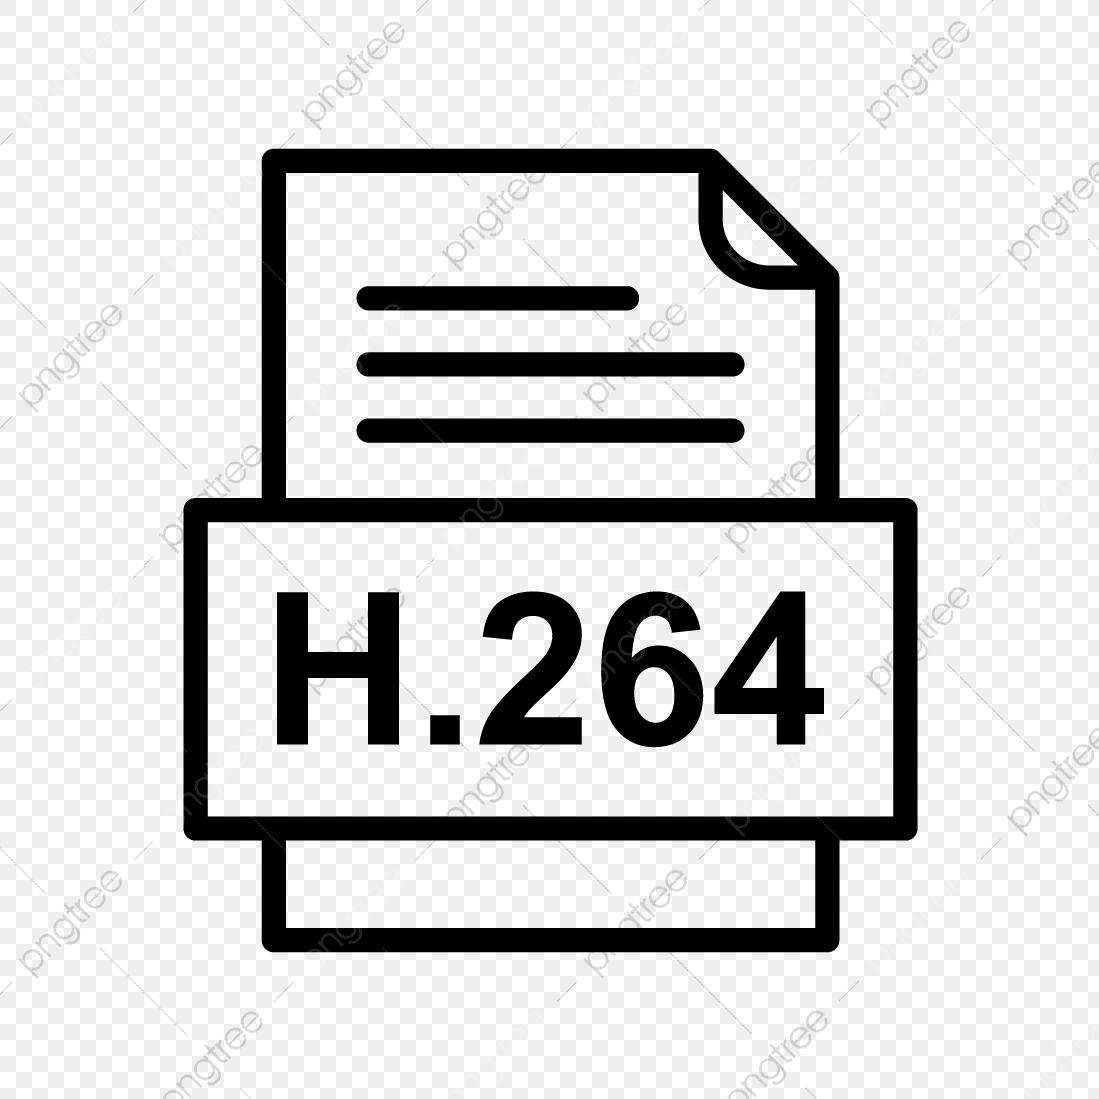 H.264 Logo - H.264 File Document Icon, H, 264, Document PNG and Vector with ...